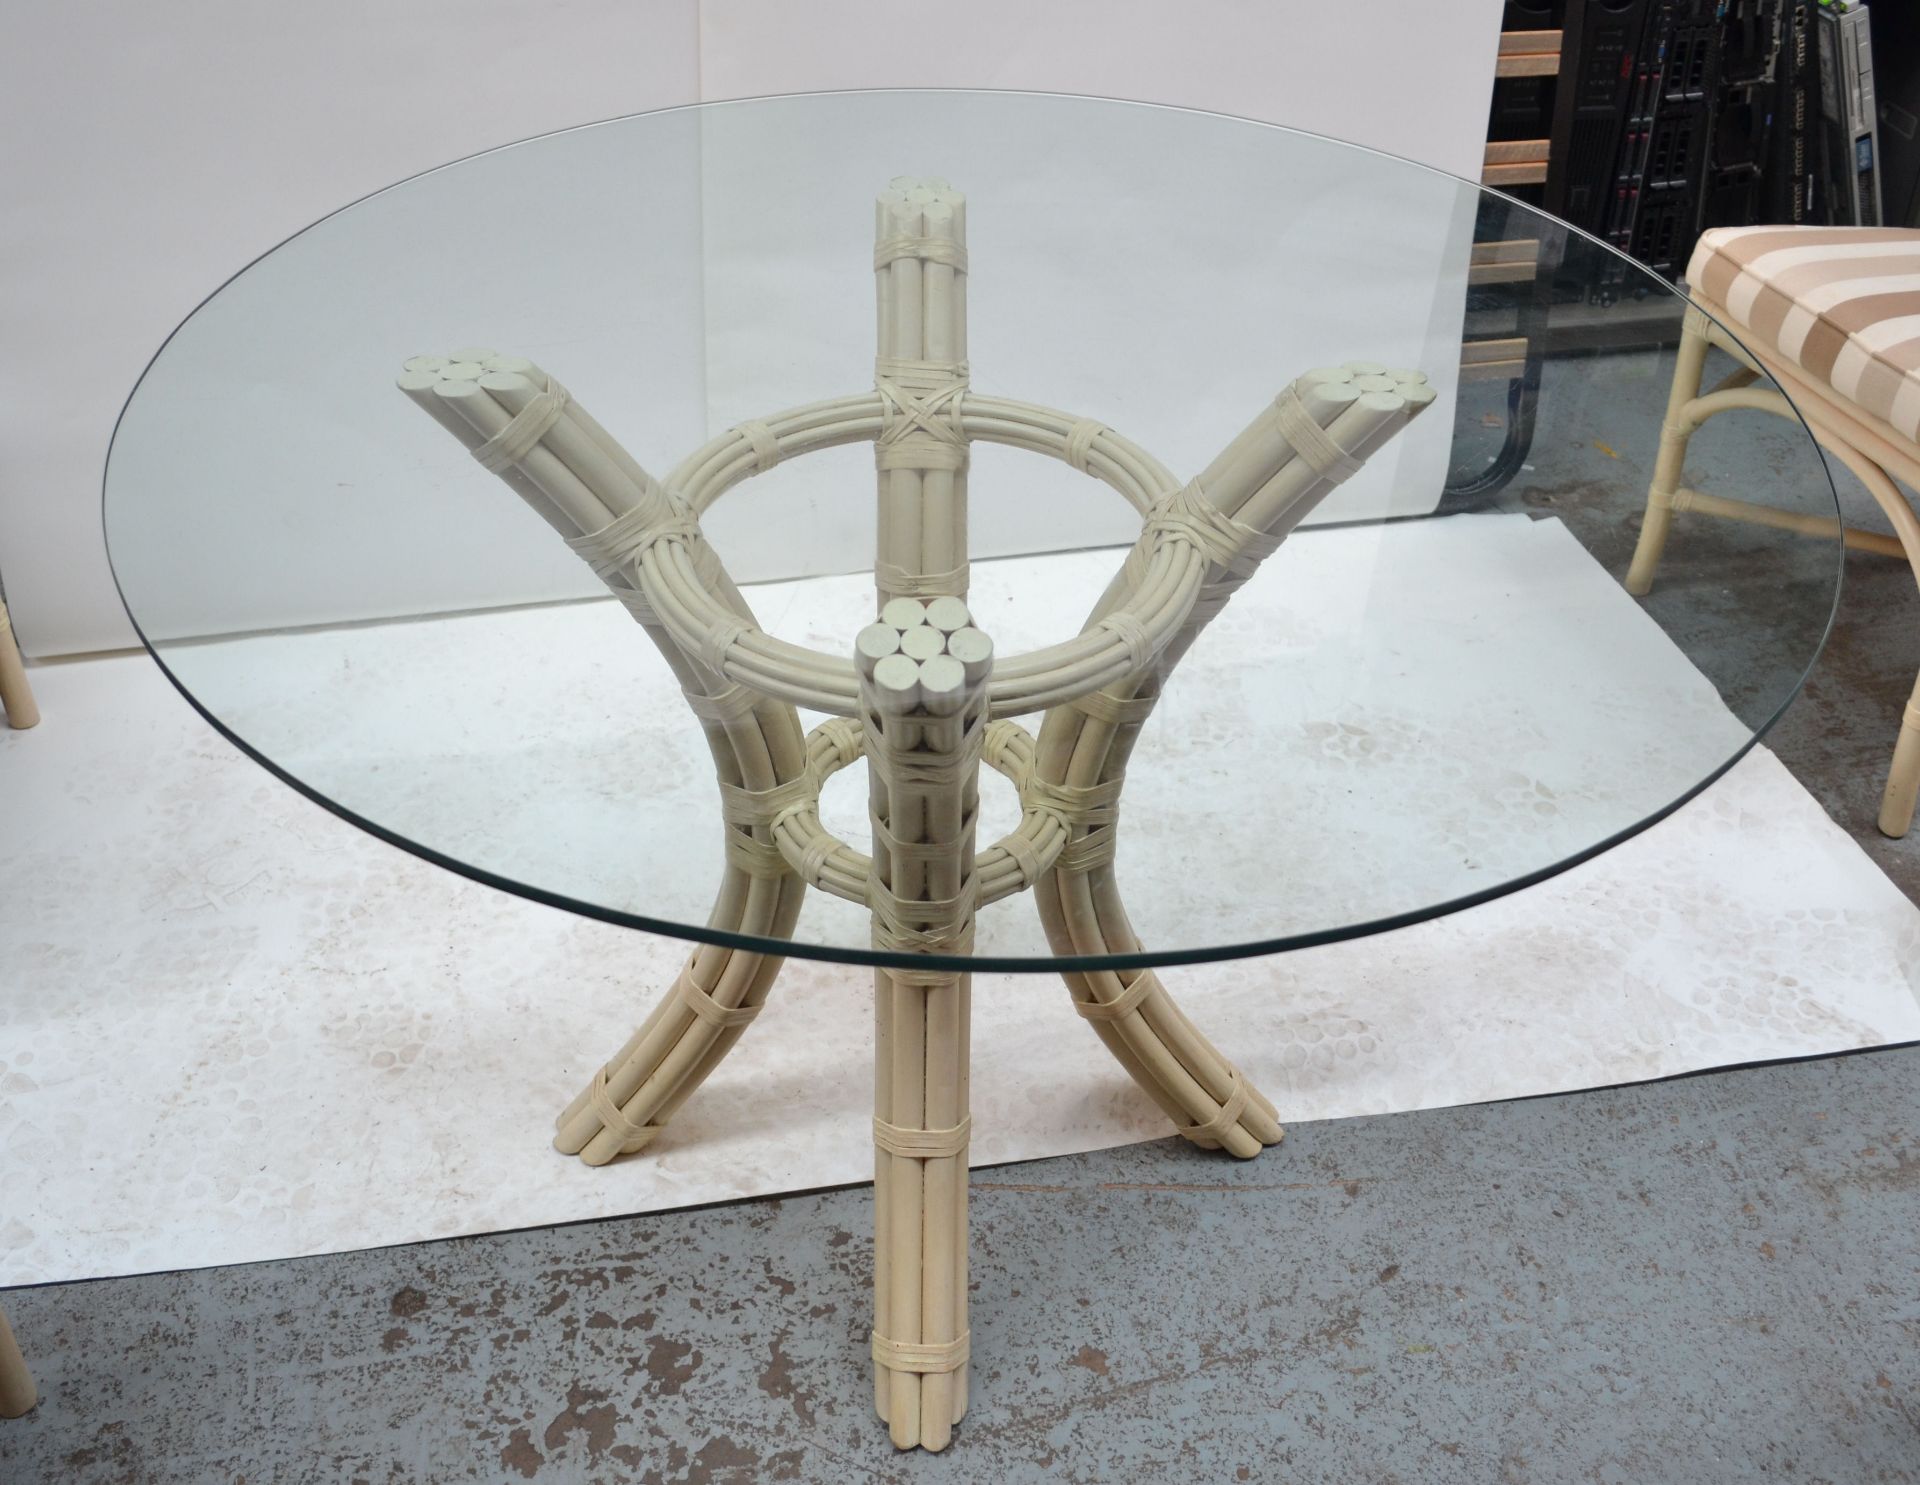 Glass Topped Cane Table with 4 Chairs - AE010 - CL007 - Location: Altrincham WA14 Dimensions: - Image 7 of 14